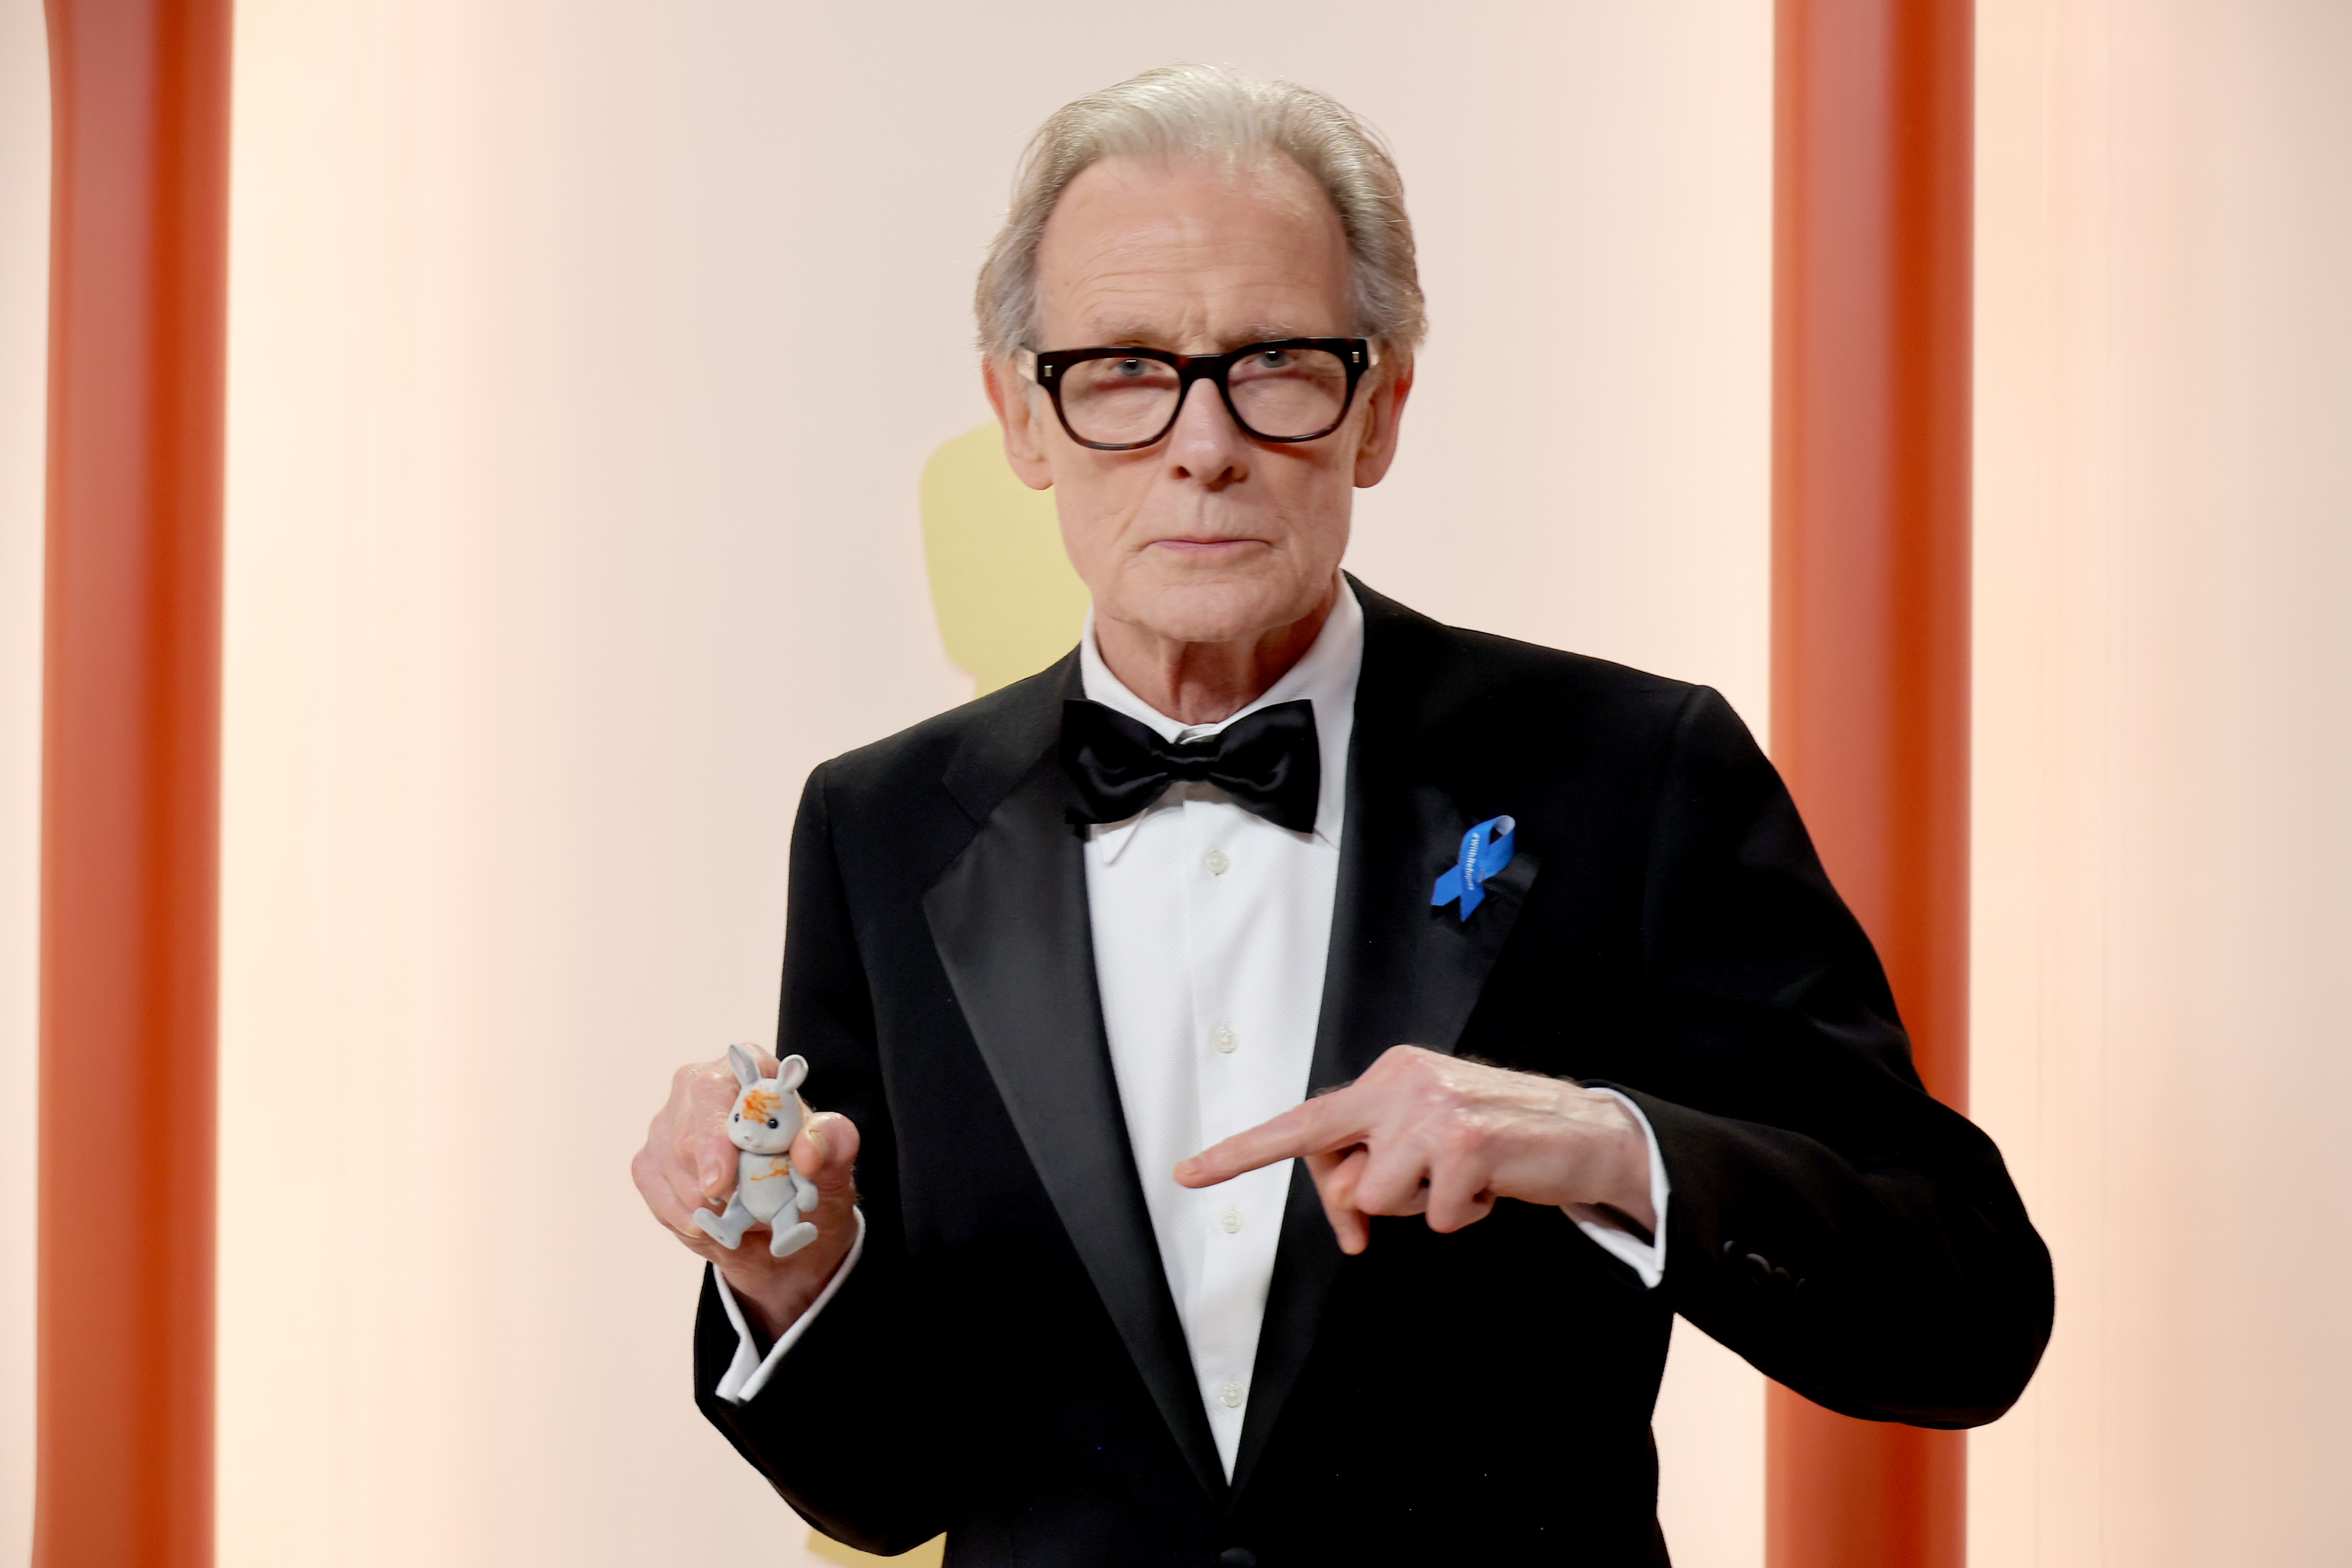 Bill Nighy at the 95th Annual Academy Awards